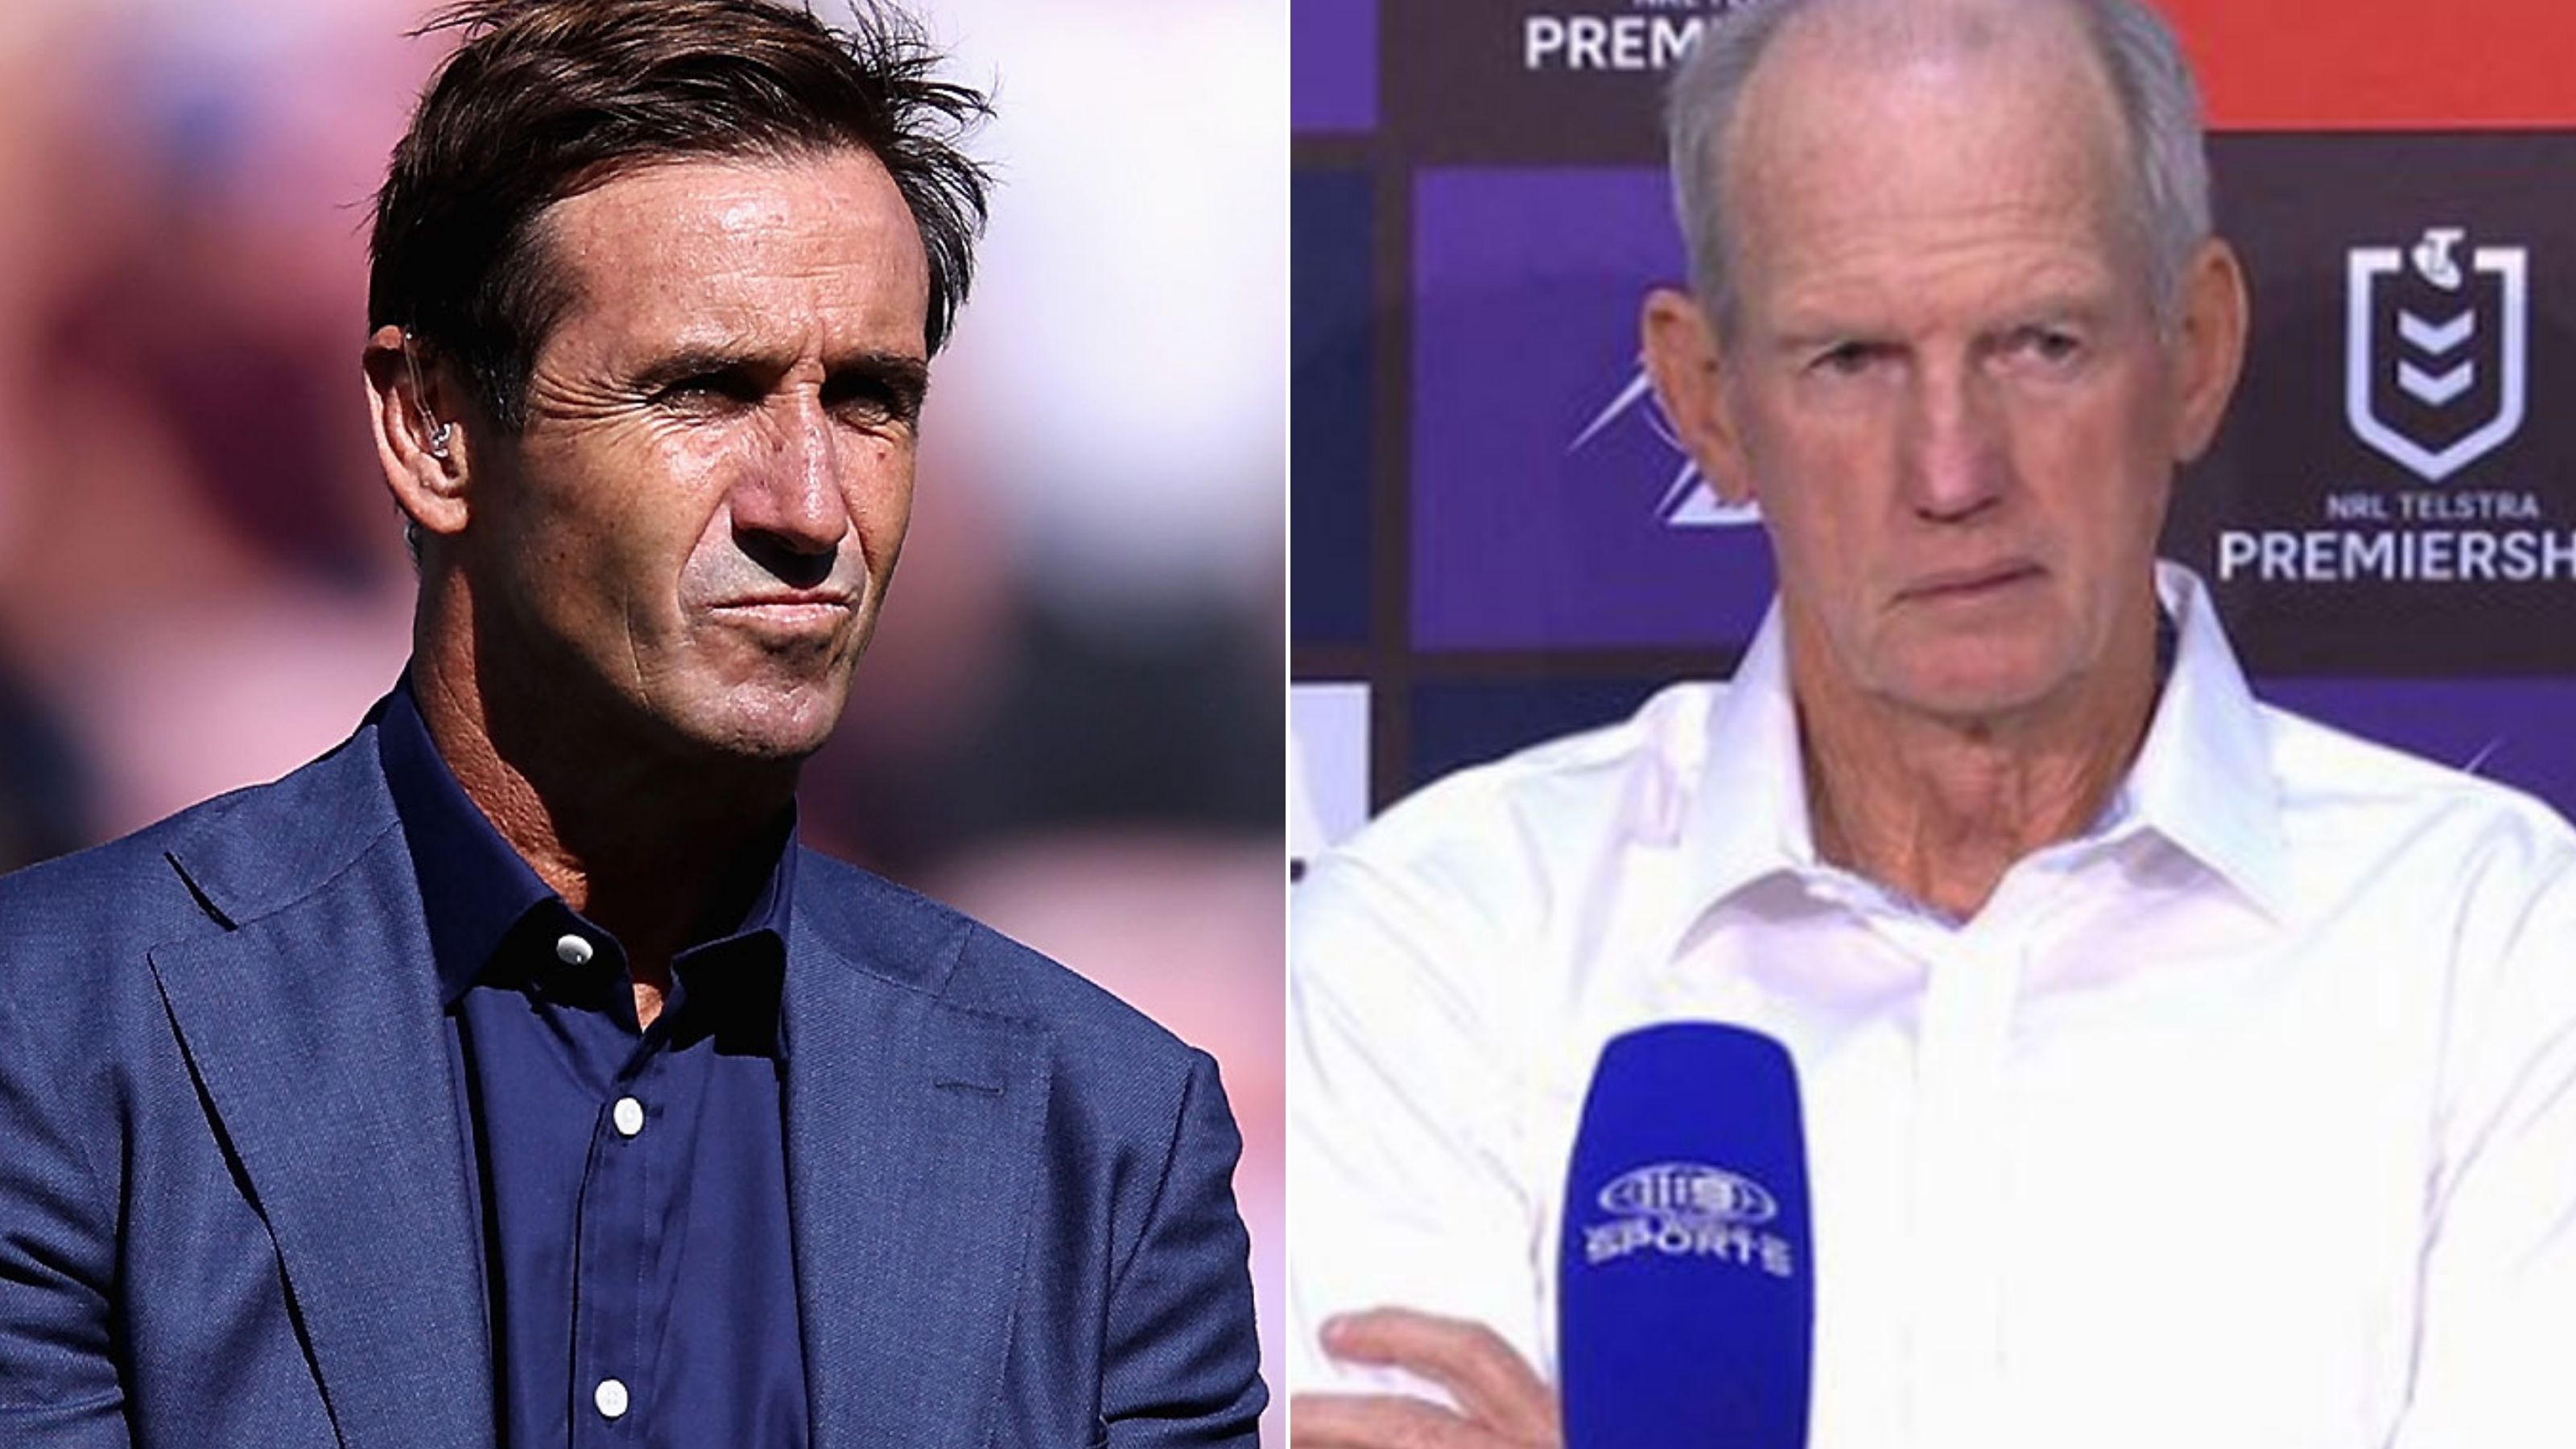 Andrew Johns blasts Wayne Bennett for 'poor form' over meeting with Kalyn Ponga